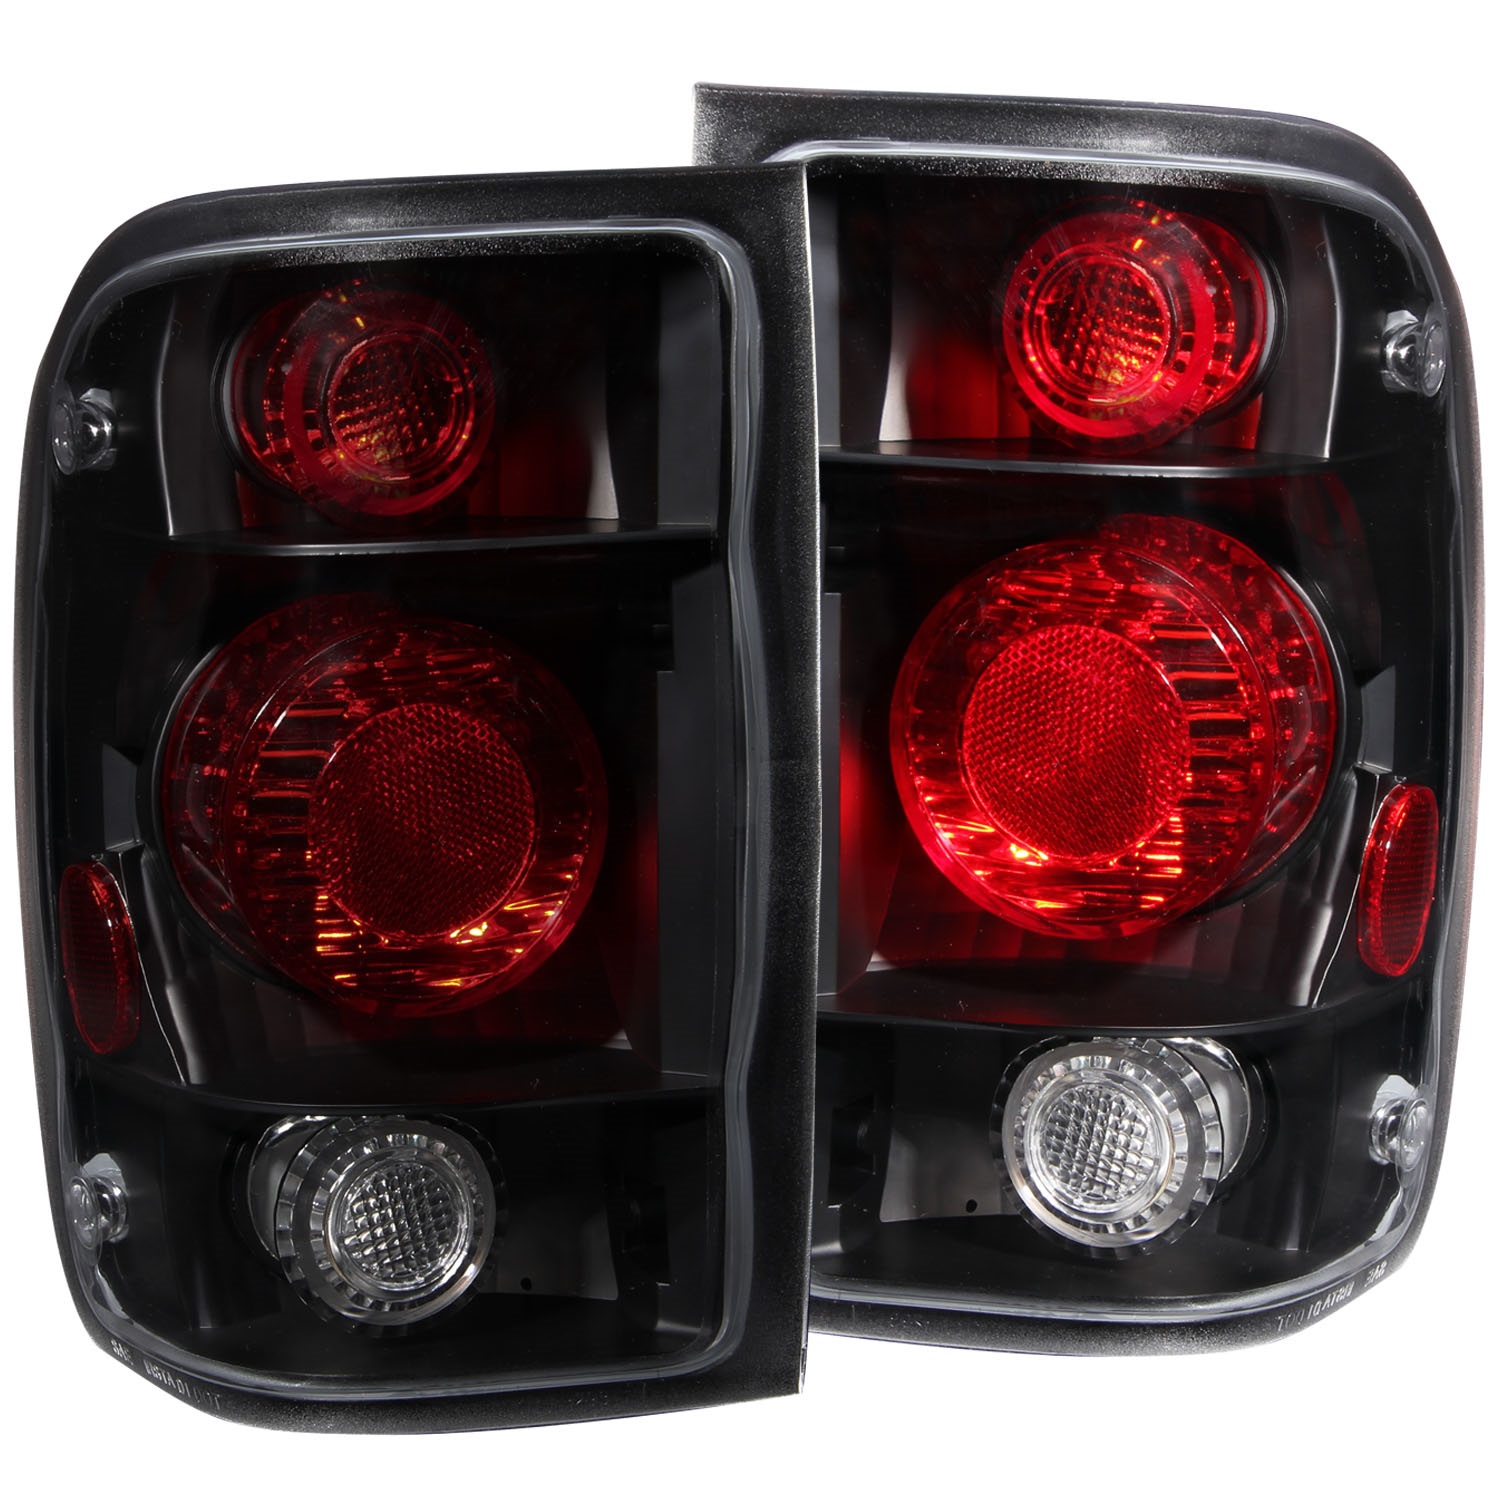 Anzo USA 211178 Tail Light Assembly Fits 98-00 Ranger